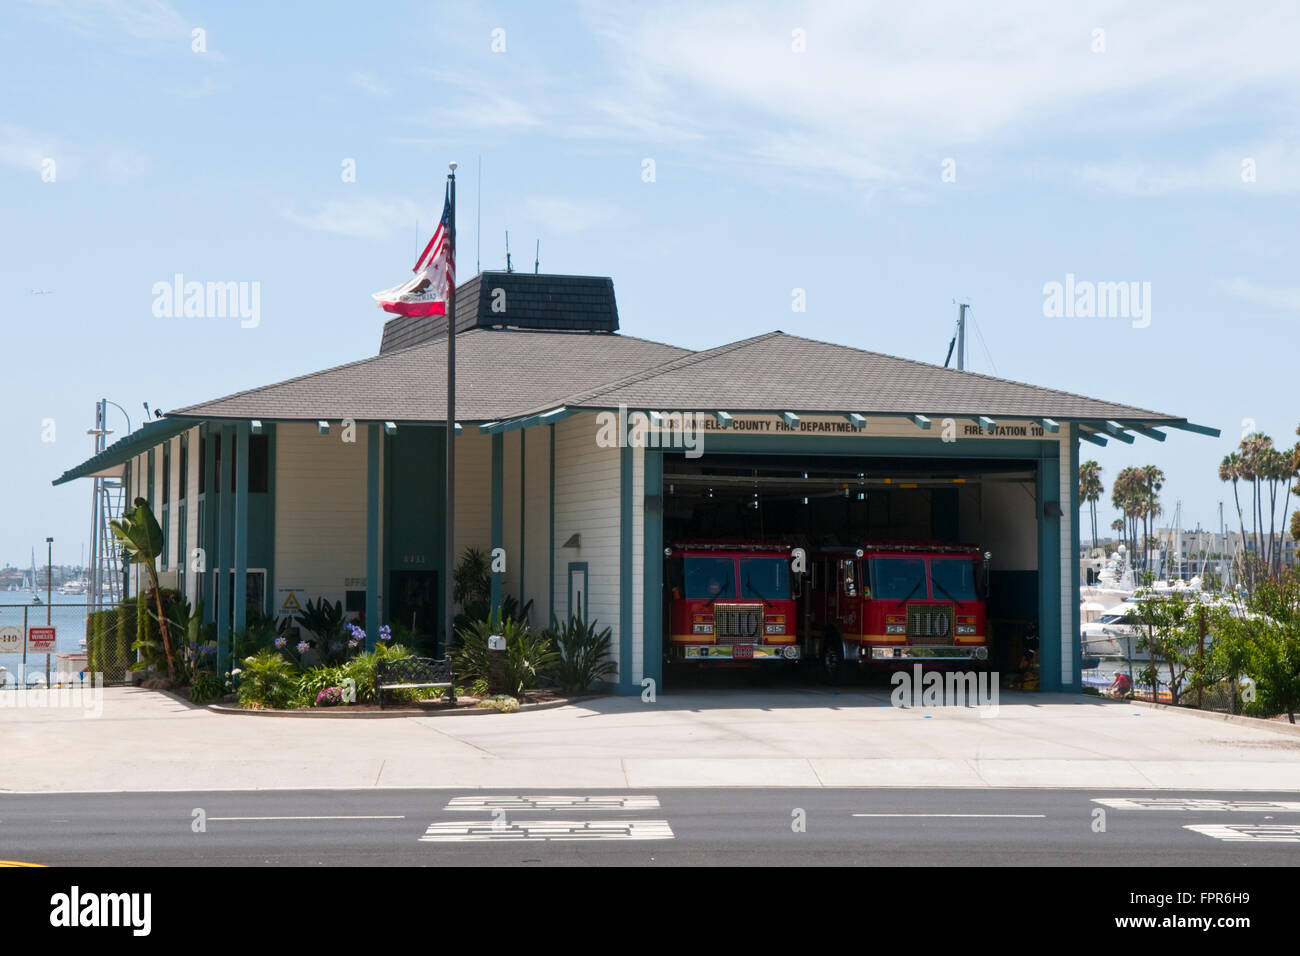 Los Angeles County Fire Department Station 110 in Marina Del Rey, California Stock Photo